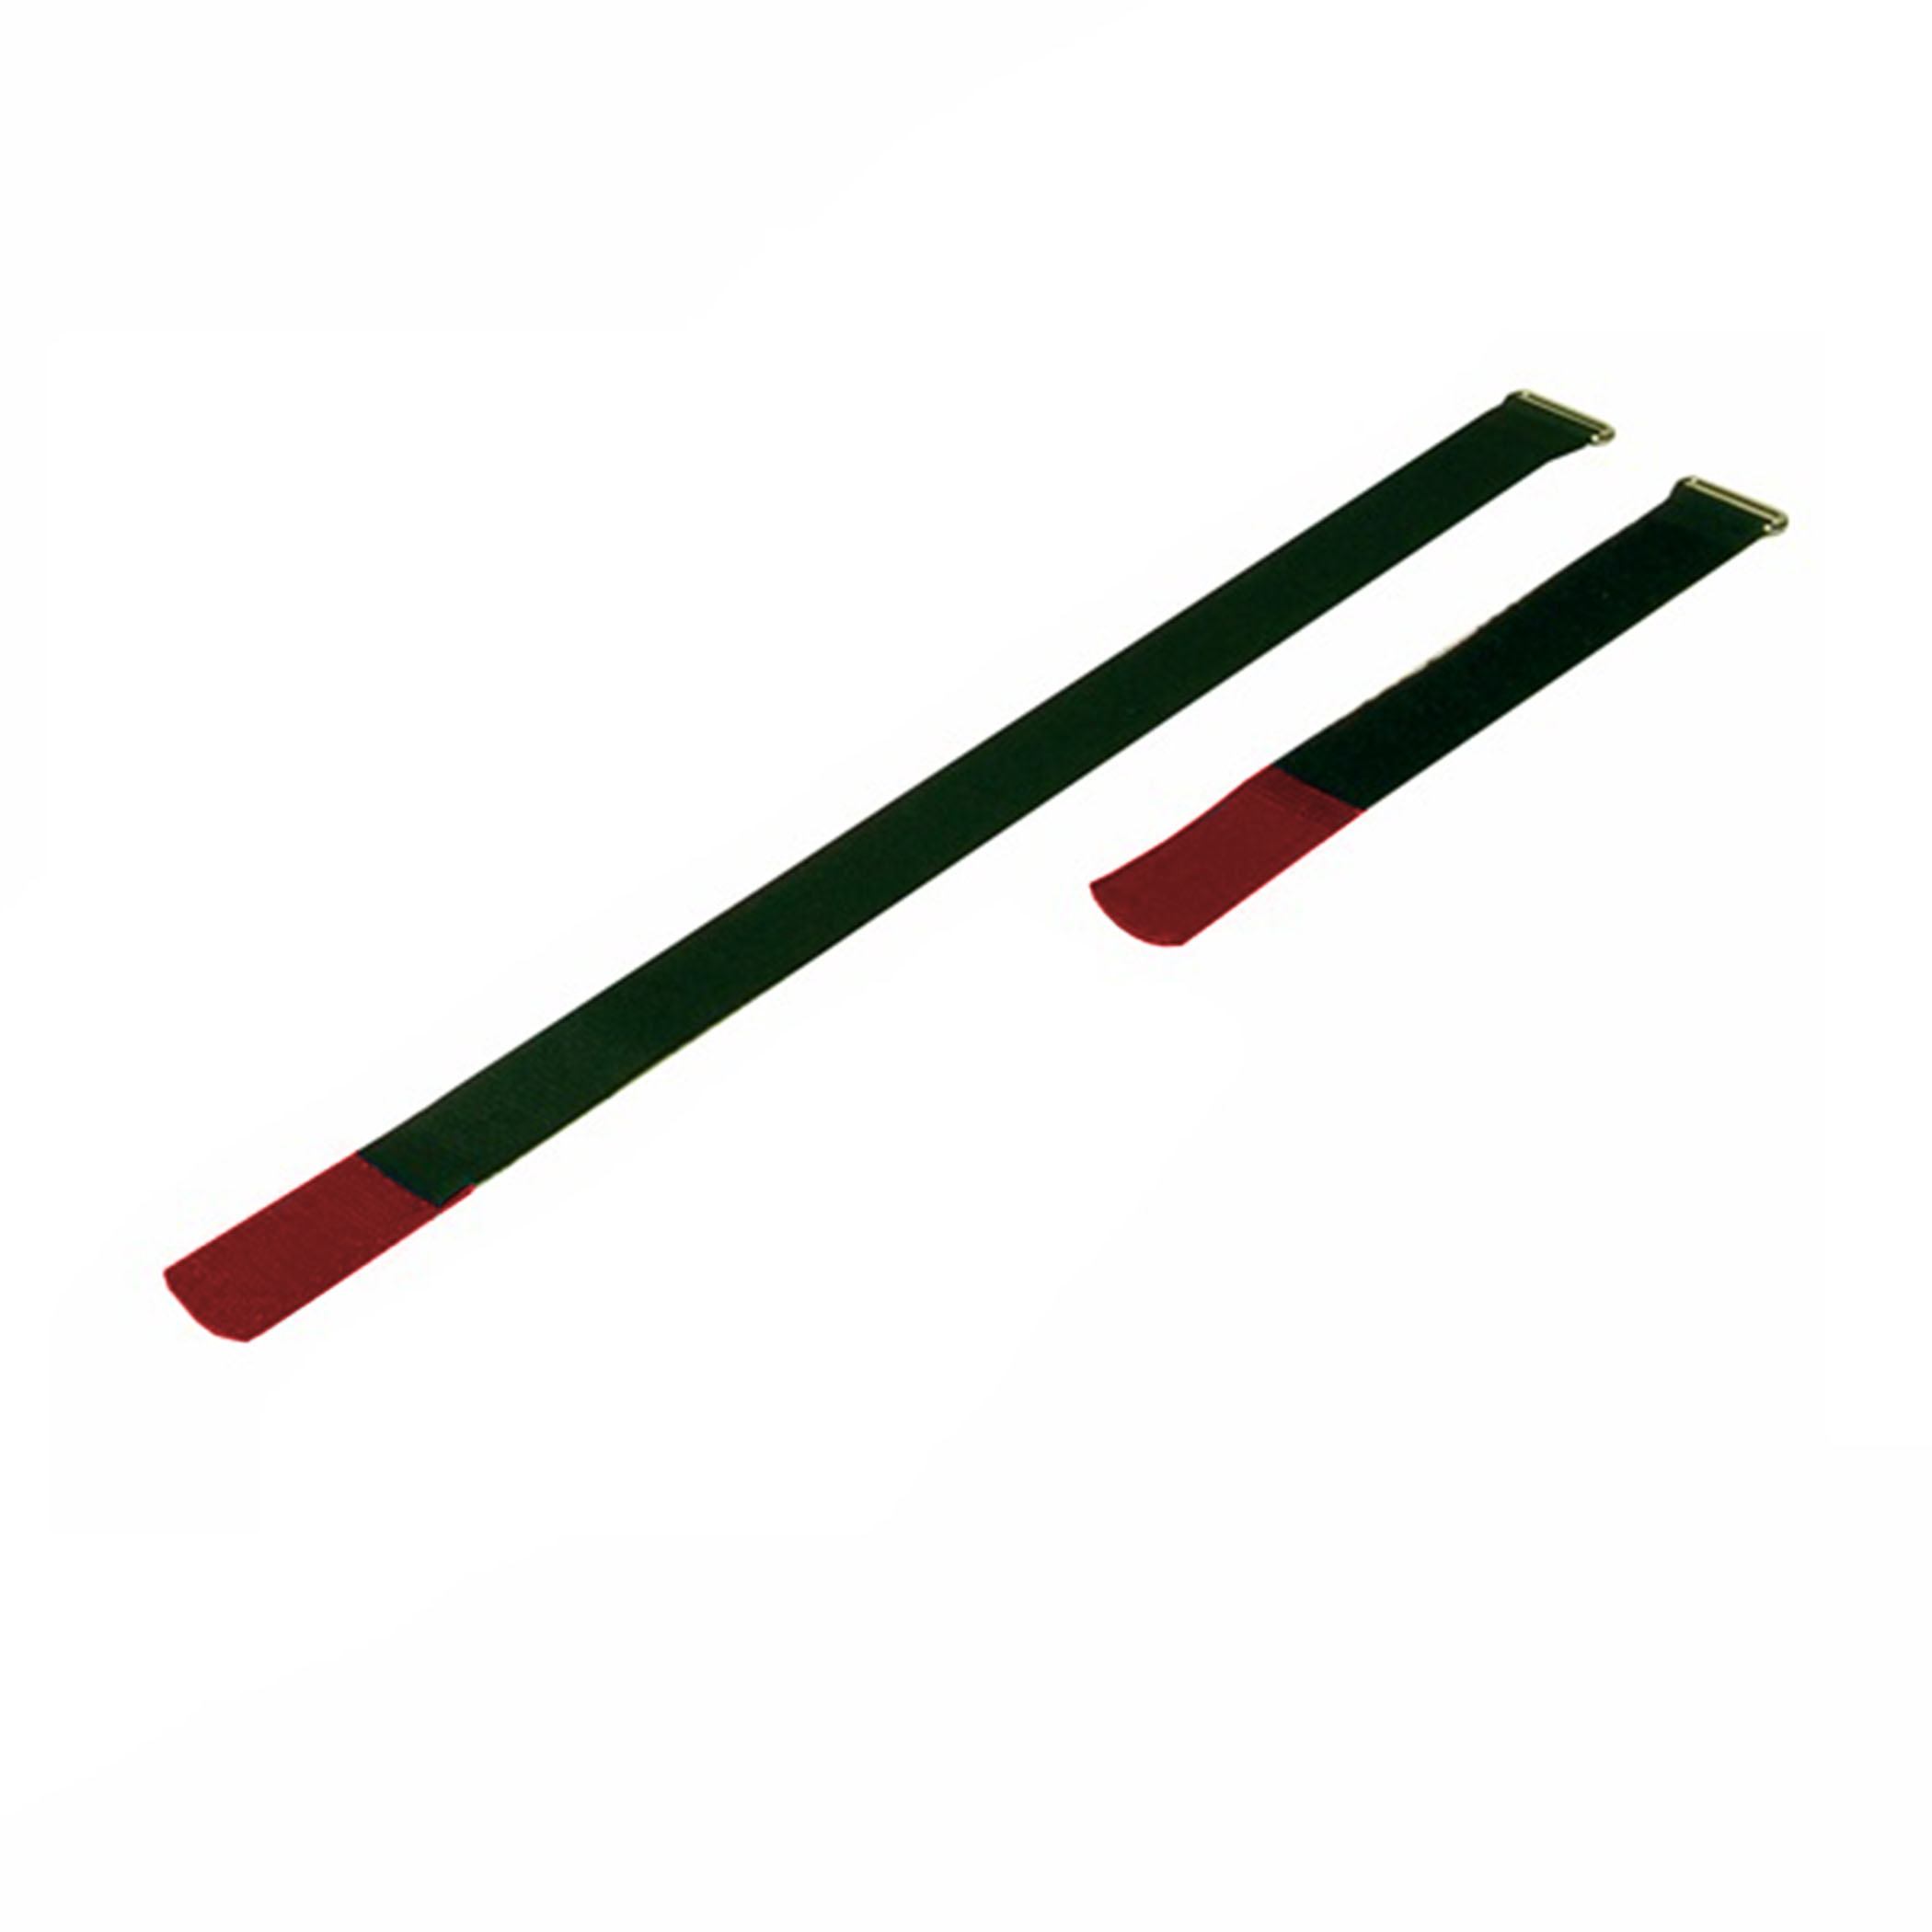 Cable Tie 300x25mm with Hook Red, (10 pieces) - a2530-600h